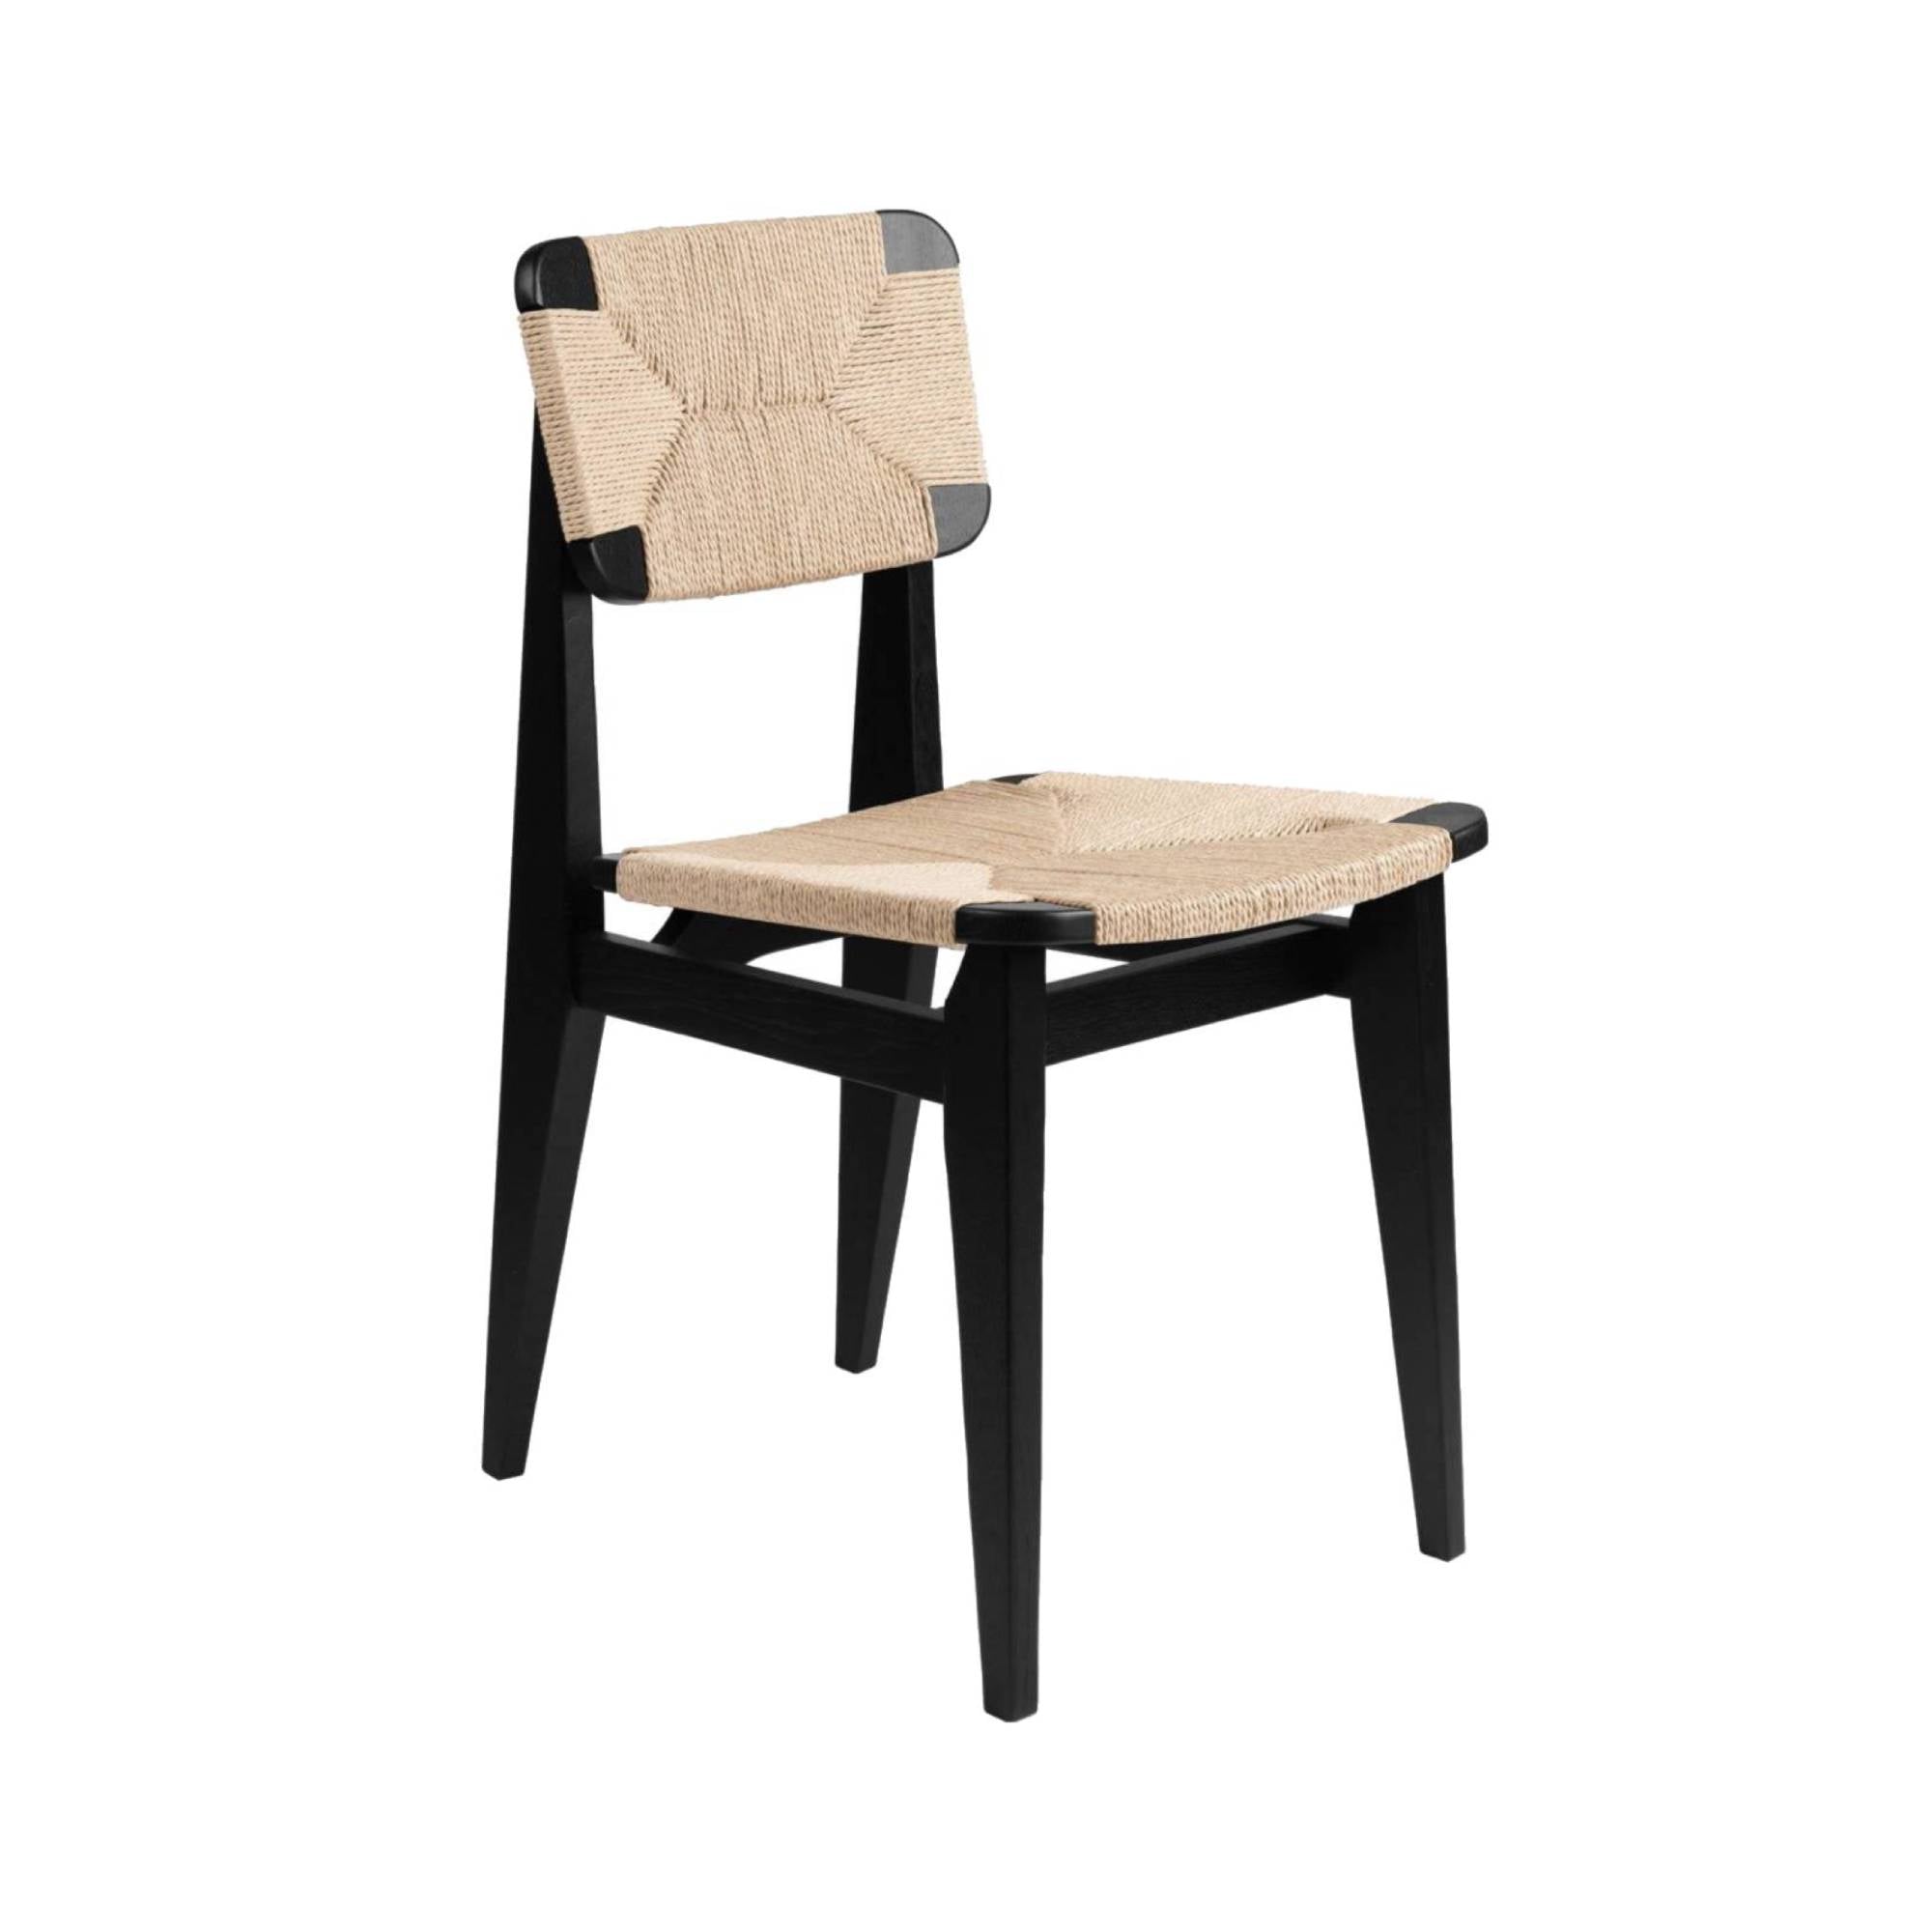 C-Chair Dining Chair: Paper Cord + Black Stained Oak